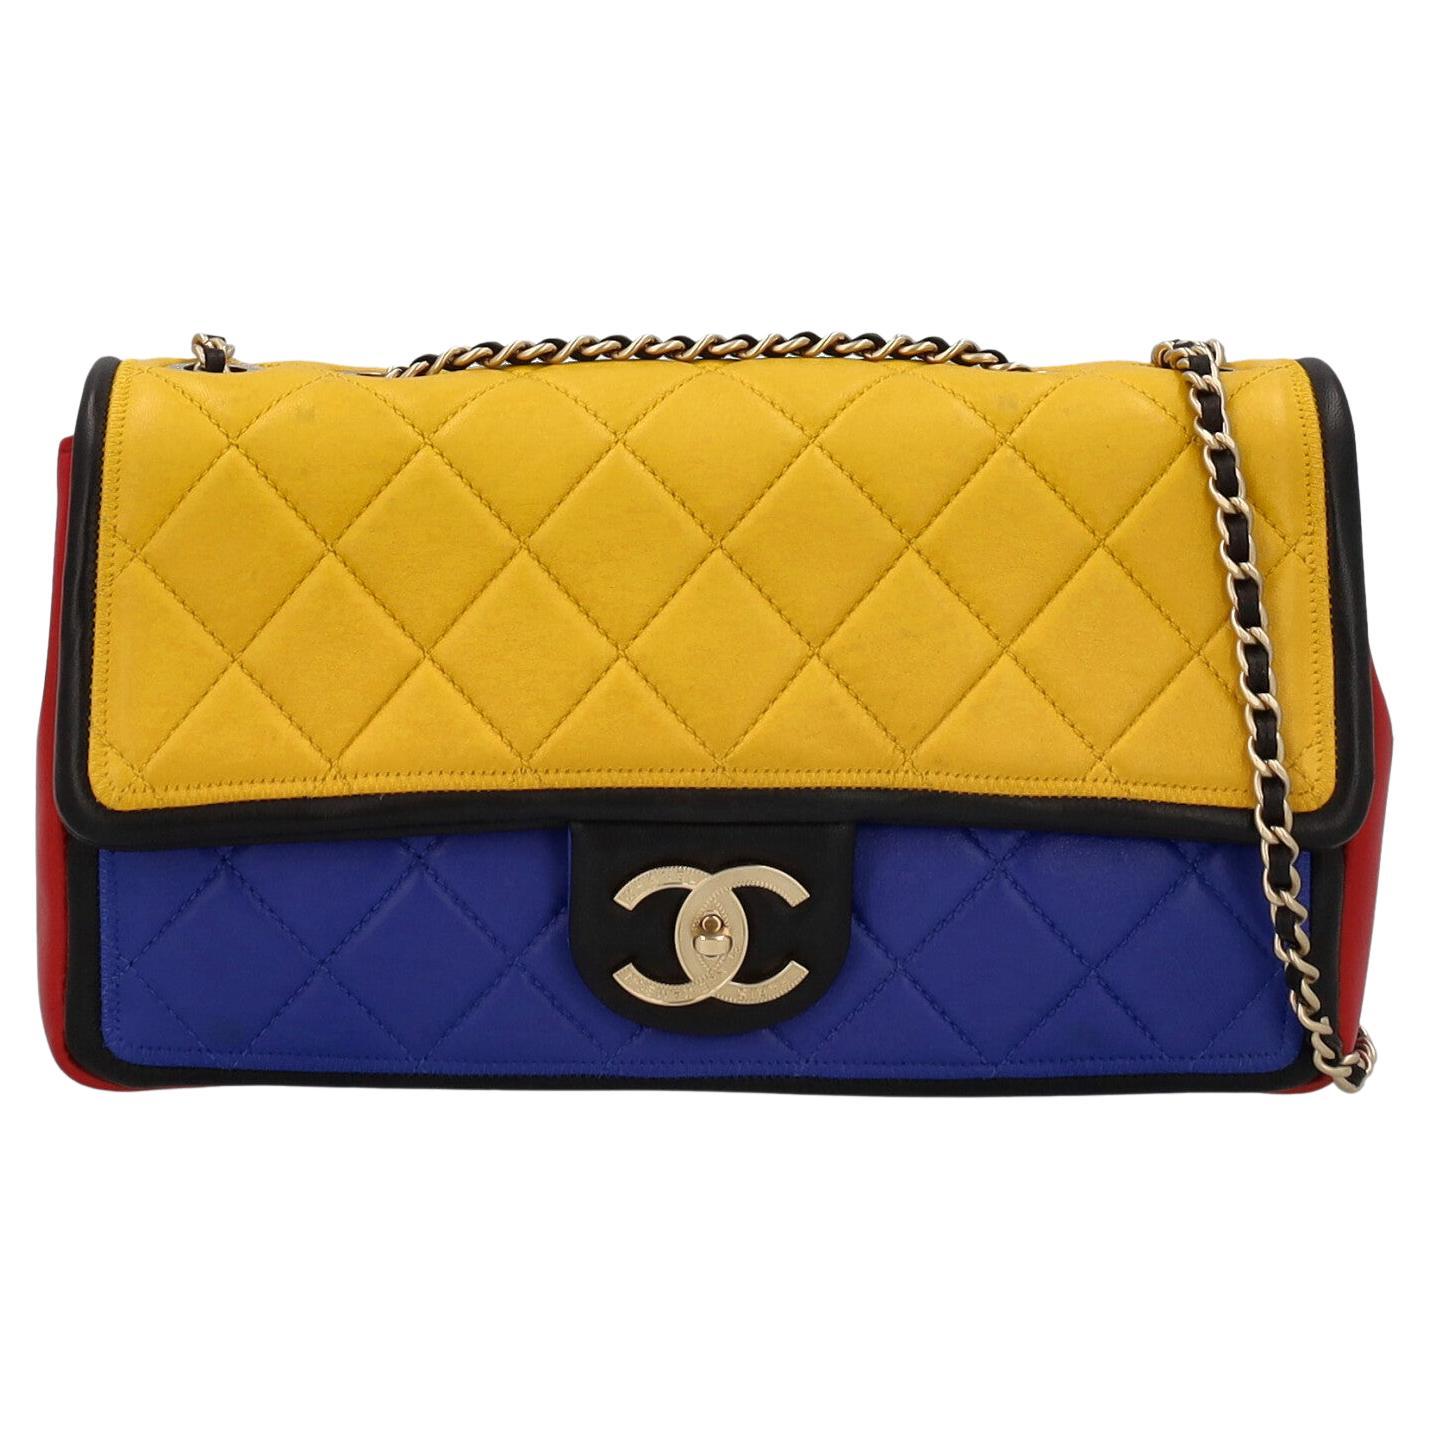 Chanel Women Shoulder bags Timeless Navy, Red, Yellow Leather 